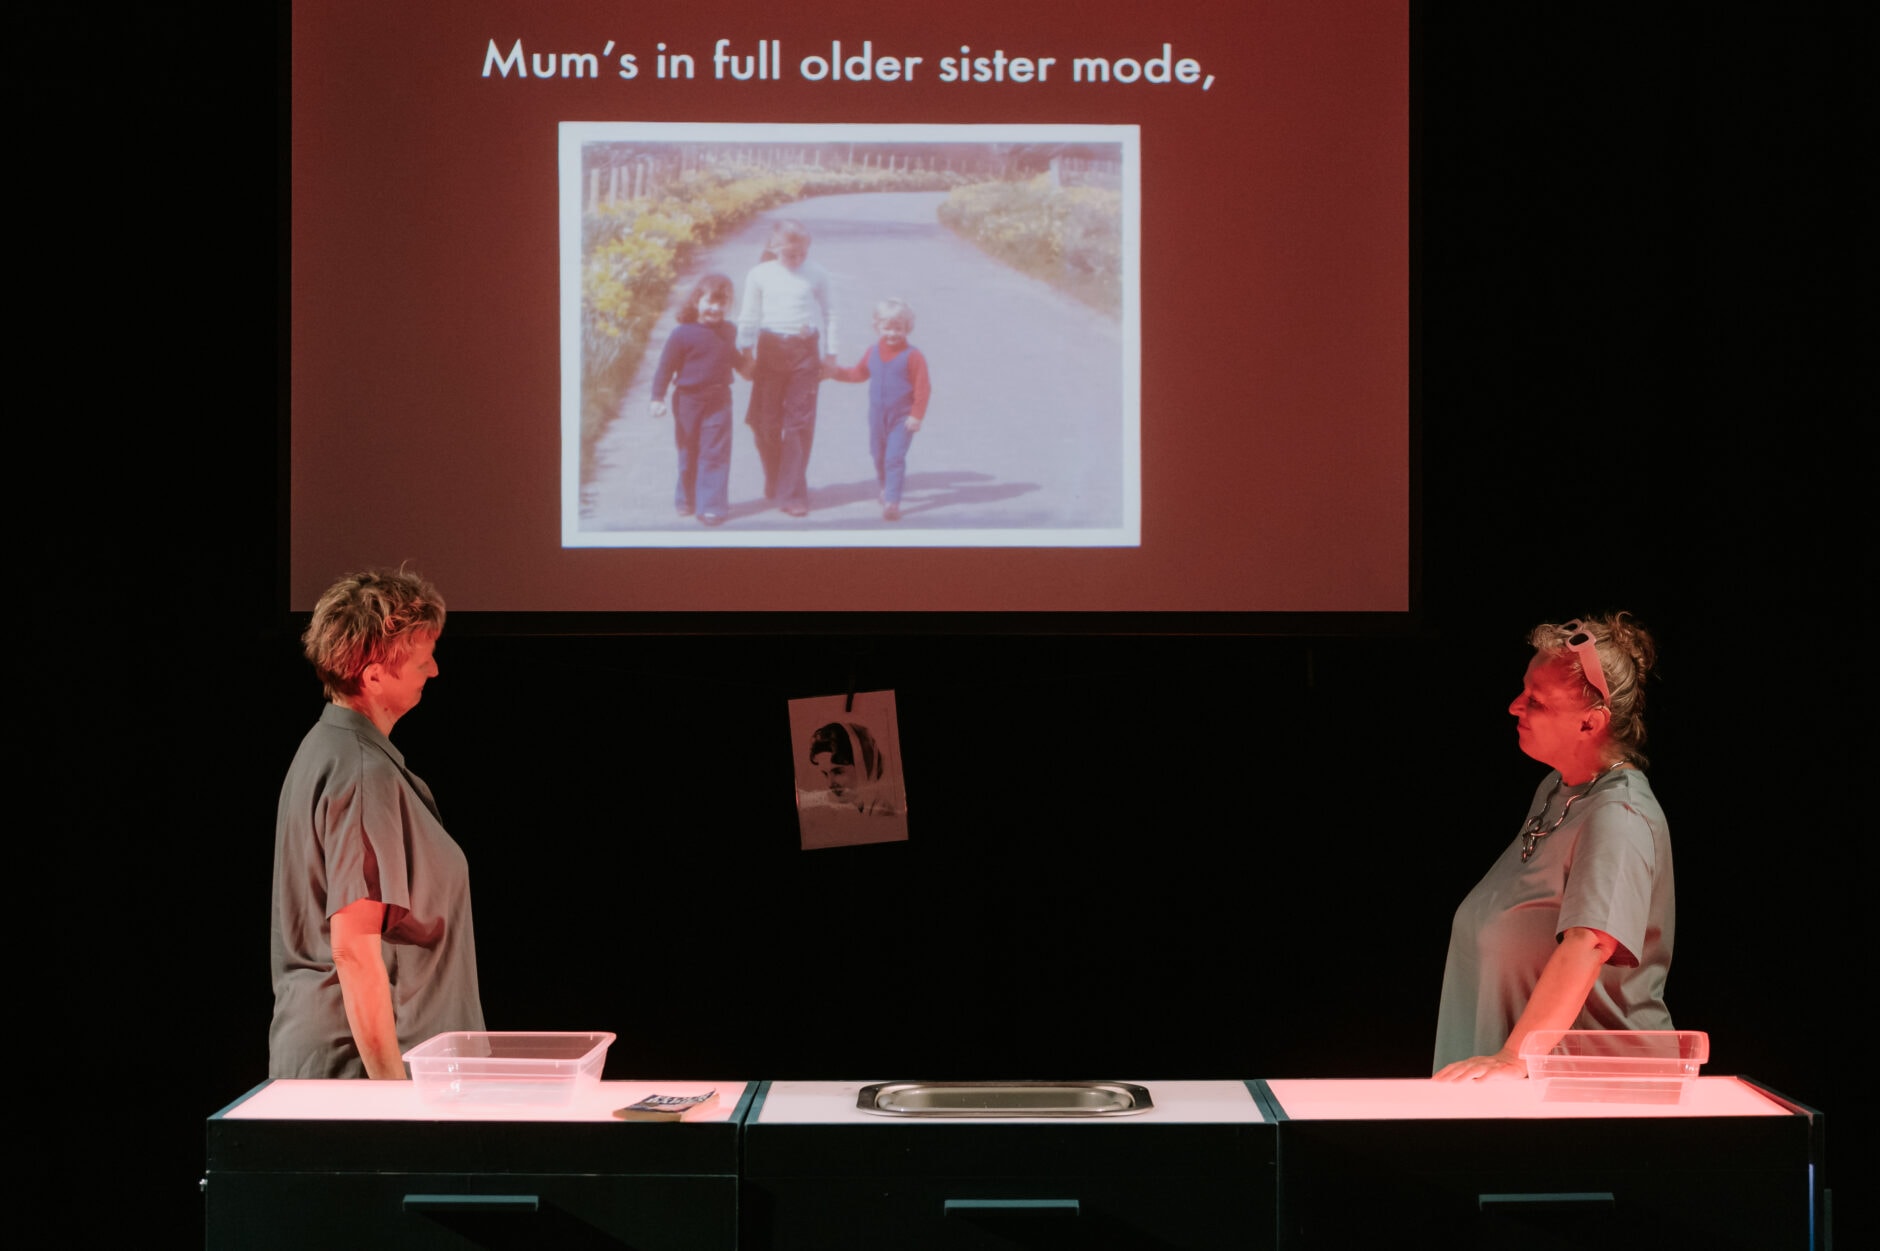 Two women stand at either end of a table. On the screen behind them, there is a photo of two kids and an adult holding hands. The words Mum's in full older sister mode are on the screen.